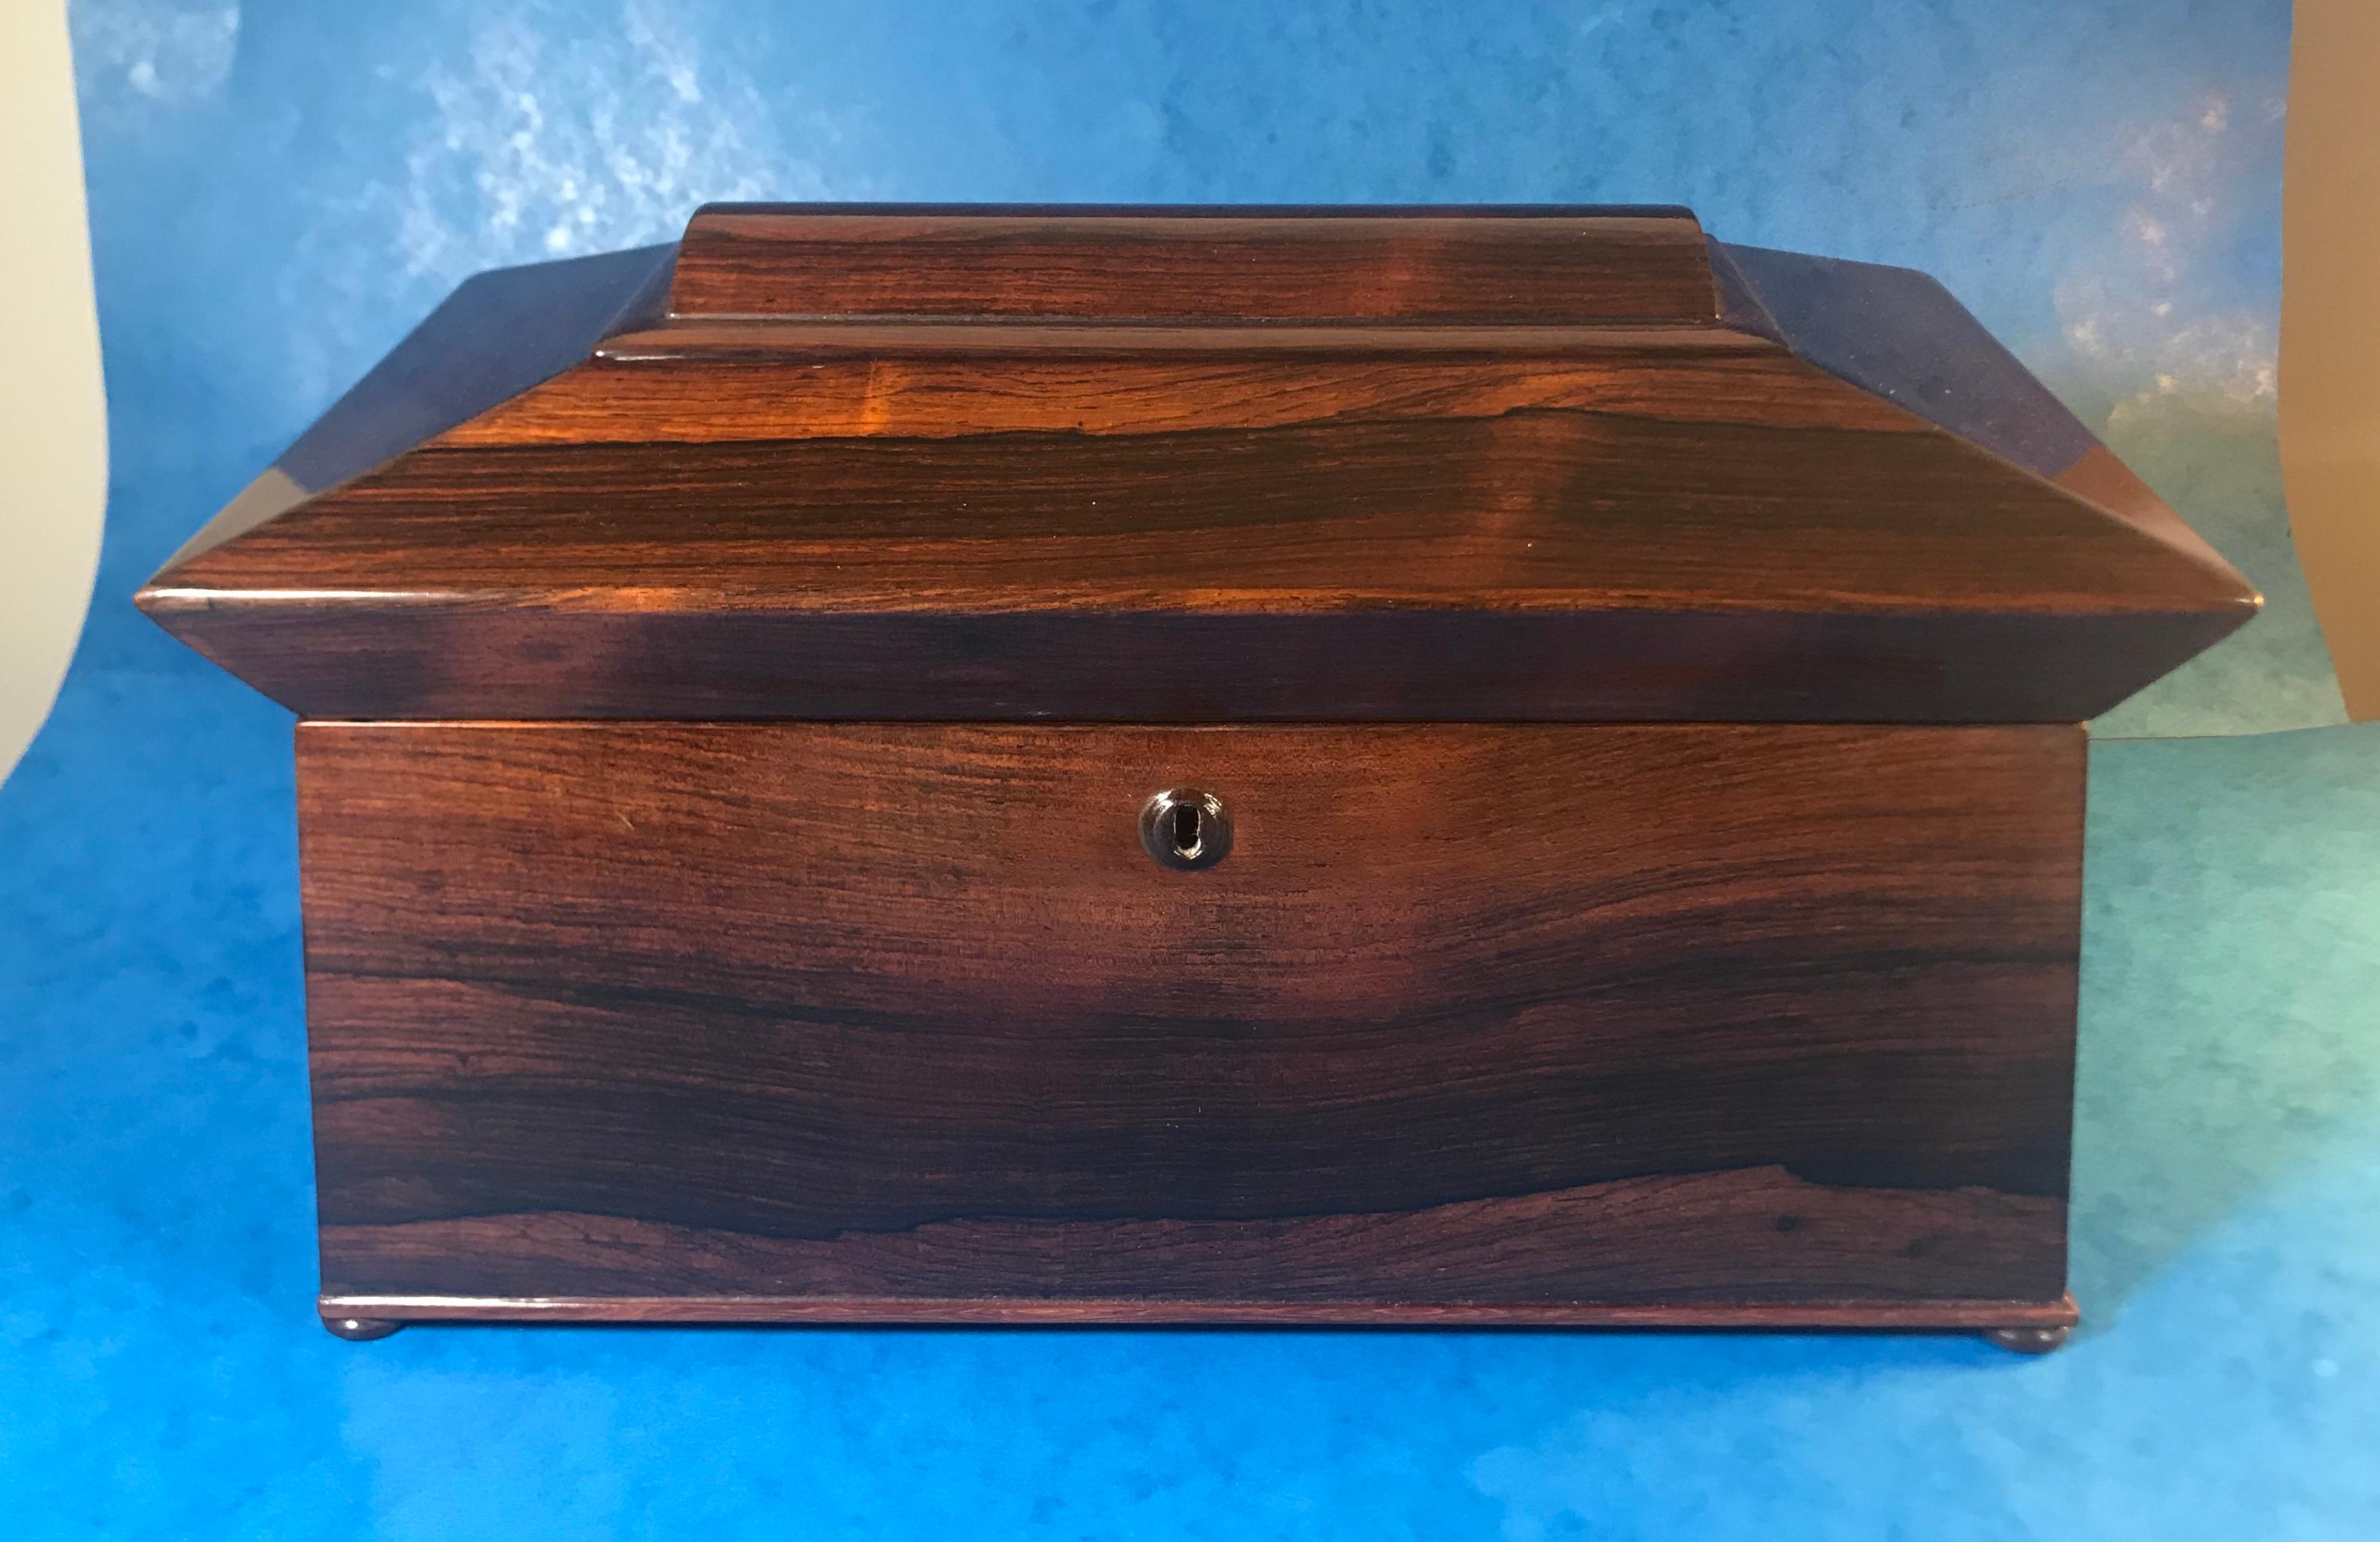 William IV rosewood sarcophagus tea caddy.
A wonderfully simple but Classic twin canister tea caddy in superb condition.
The tea caddy sits on four rosewood bun feet with ring handles to the sides. It dates back to circa 1830.
The box has a fully